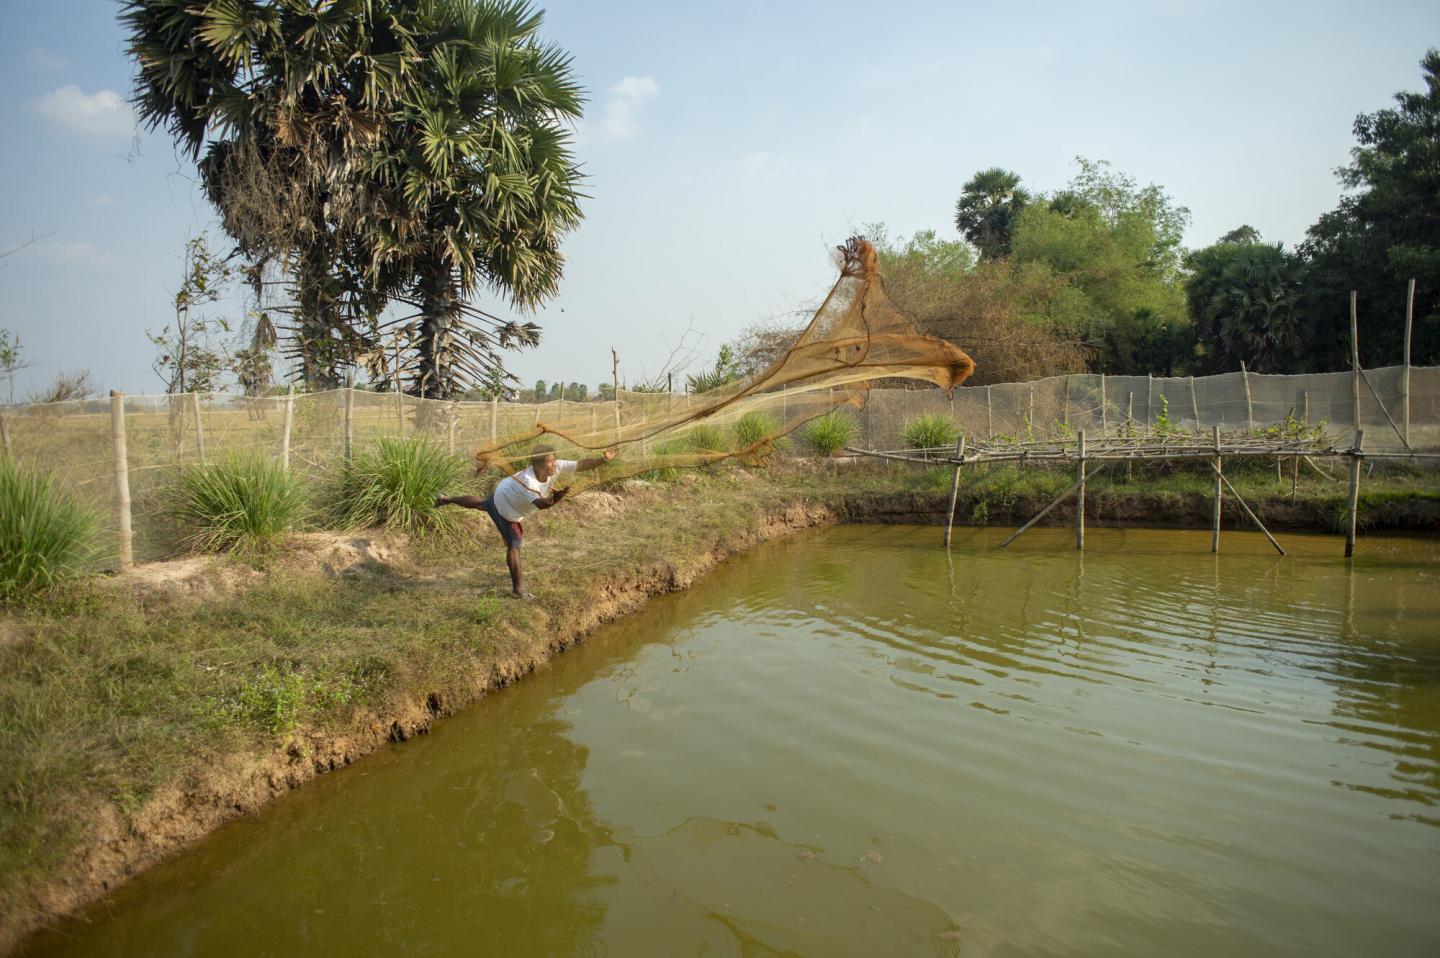 A Cambodian man casts a net into a fish pond.